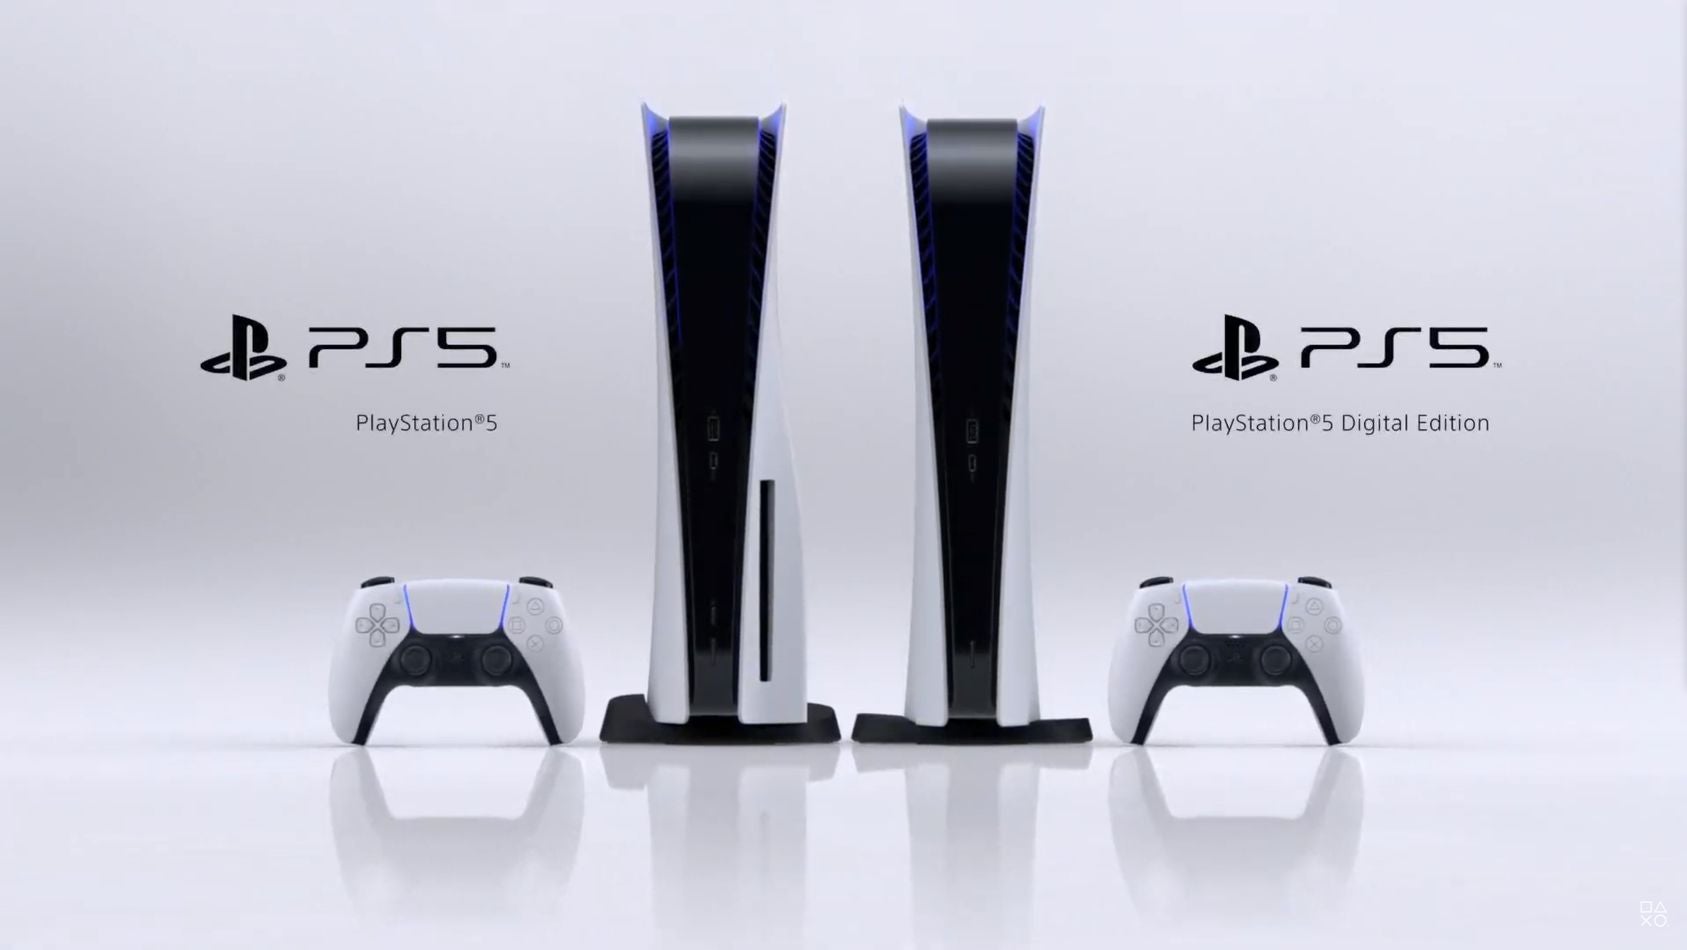 PS5 specs and features, including SSD, ray tracing, GPU and